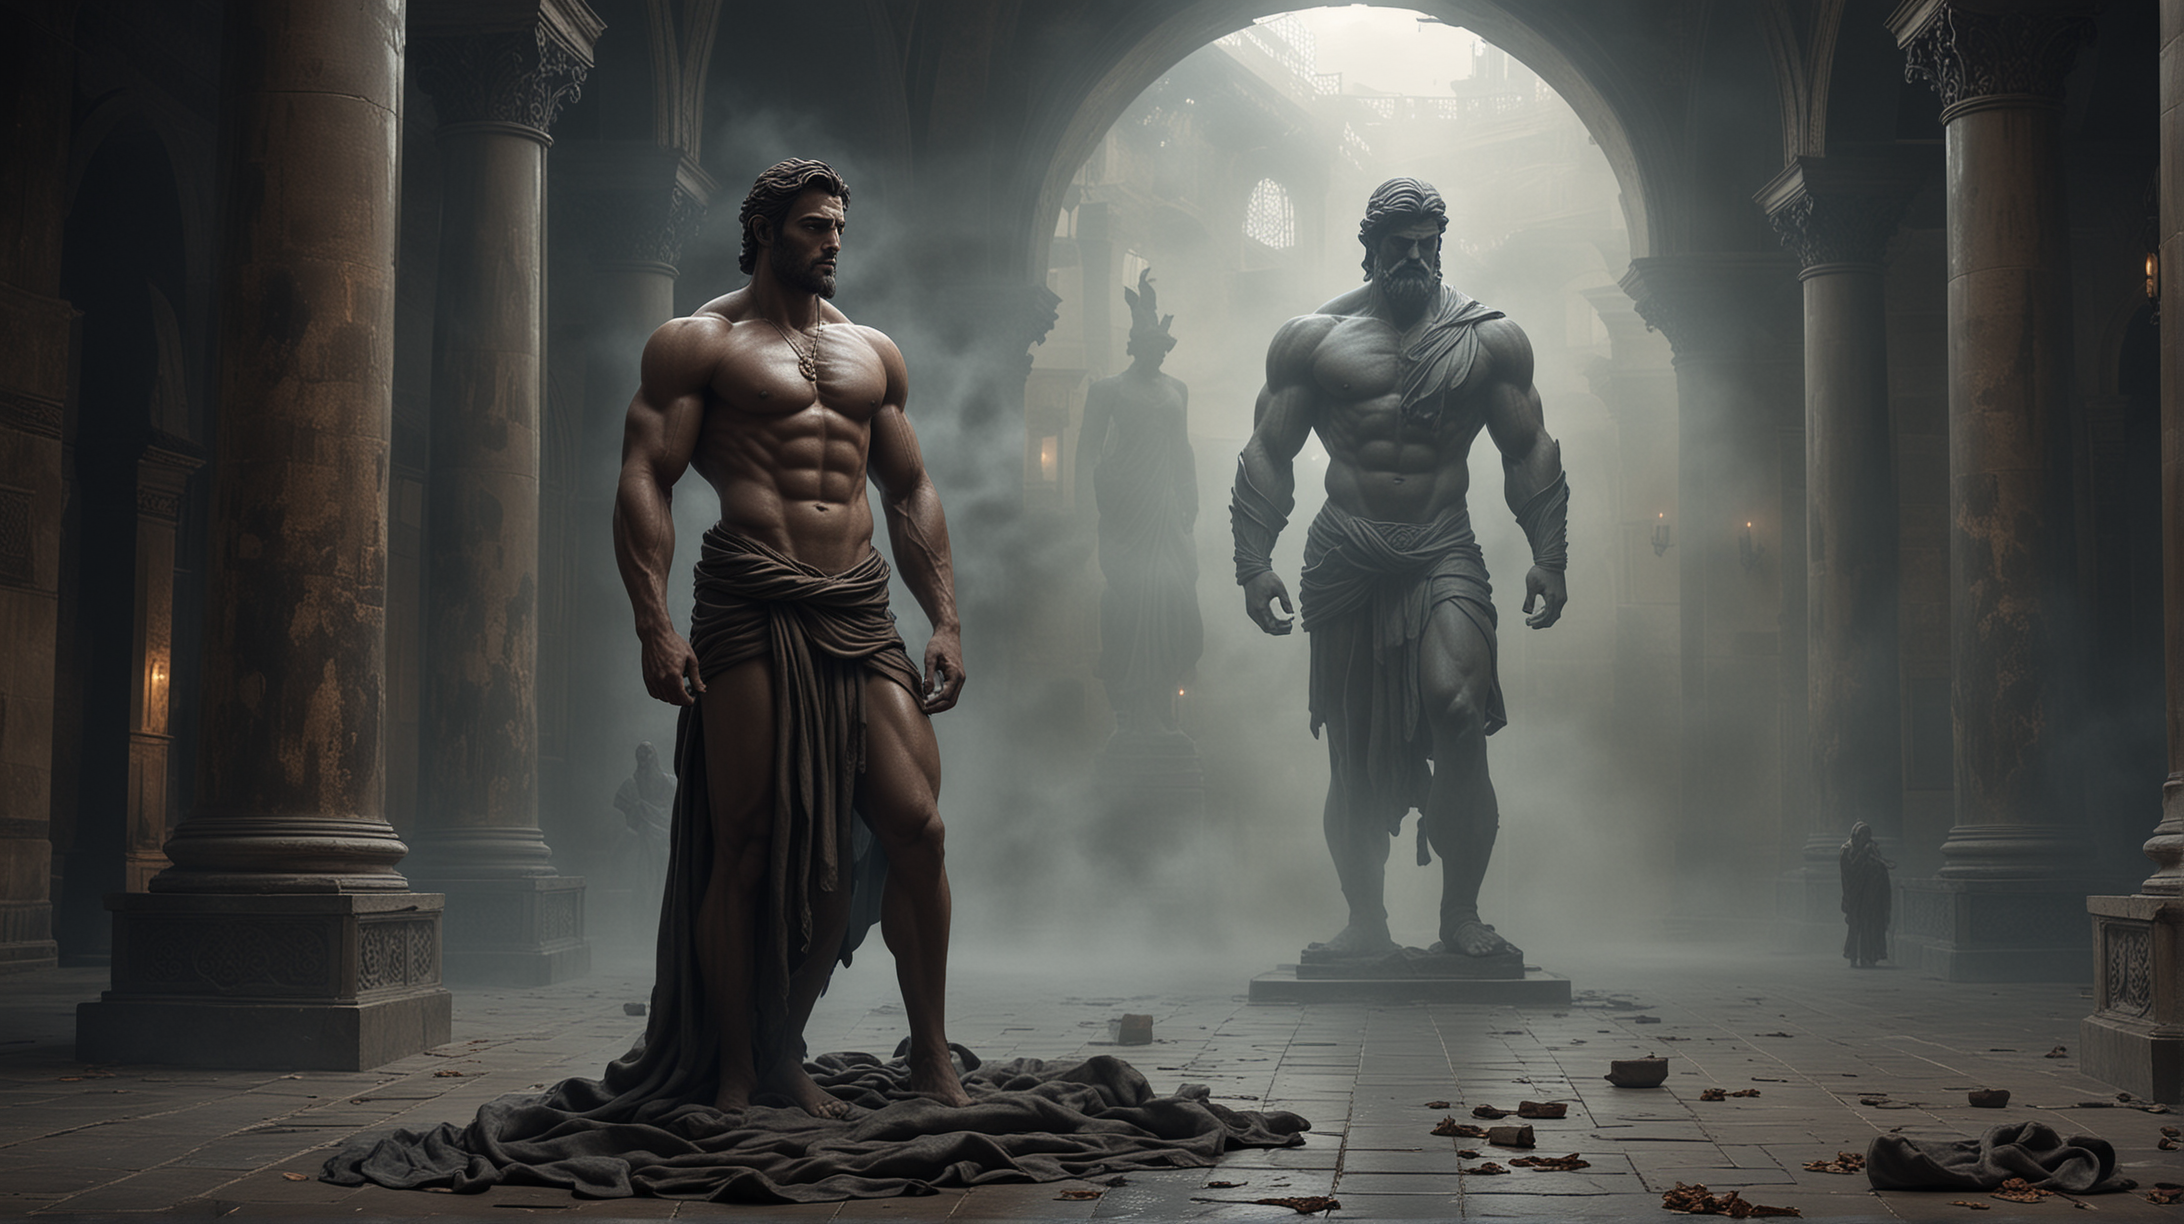 Create an atmospheric digital painting depicting a full body  giant statue of a muscular man with clothes on outside a dark palace setting, The background should be enveloped in shadows, with a mysterious fog swirling around the statue, Capture the essence of ancient wisdom and stoicism in the dimly lit ambiance, bringing out the details of the statue while maintaining an overall dark and haunting tone